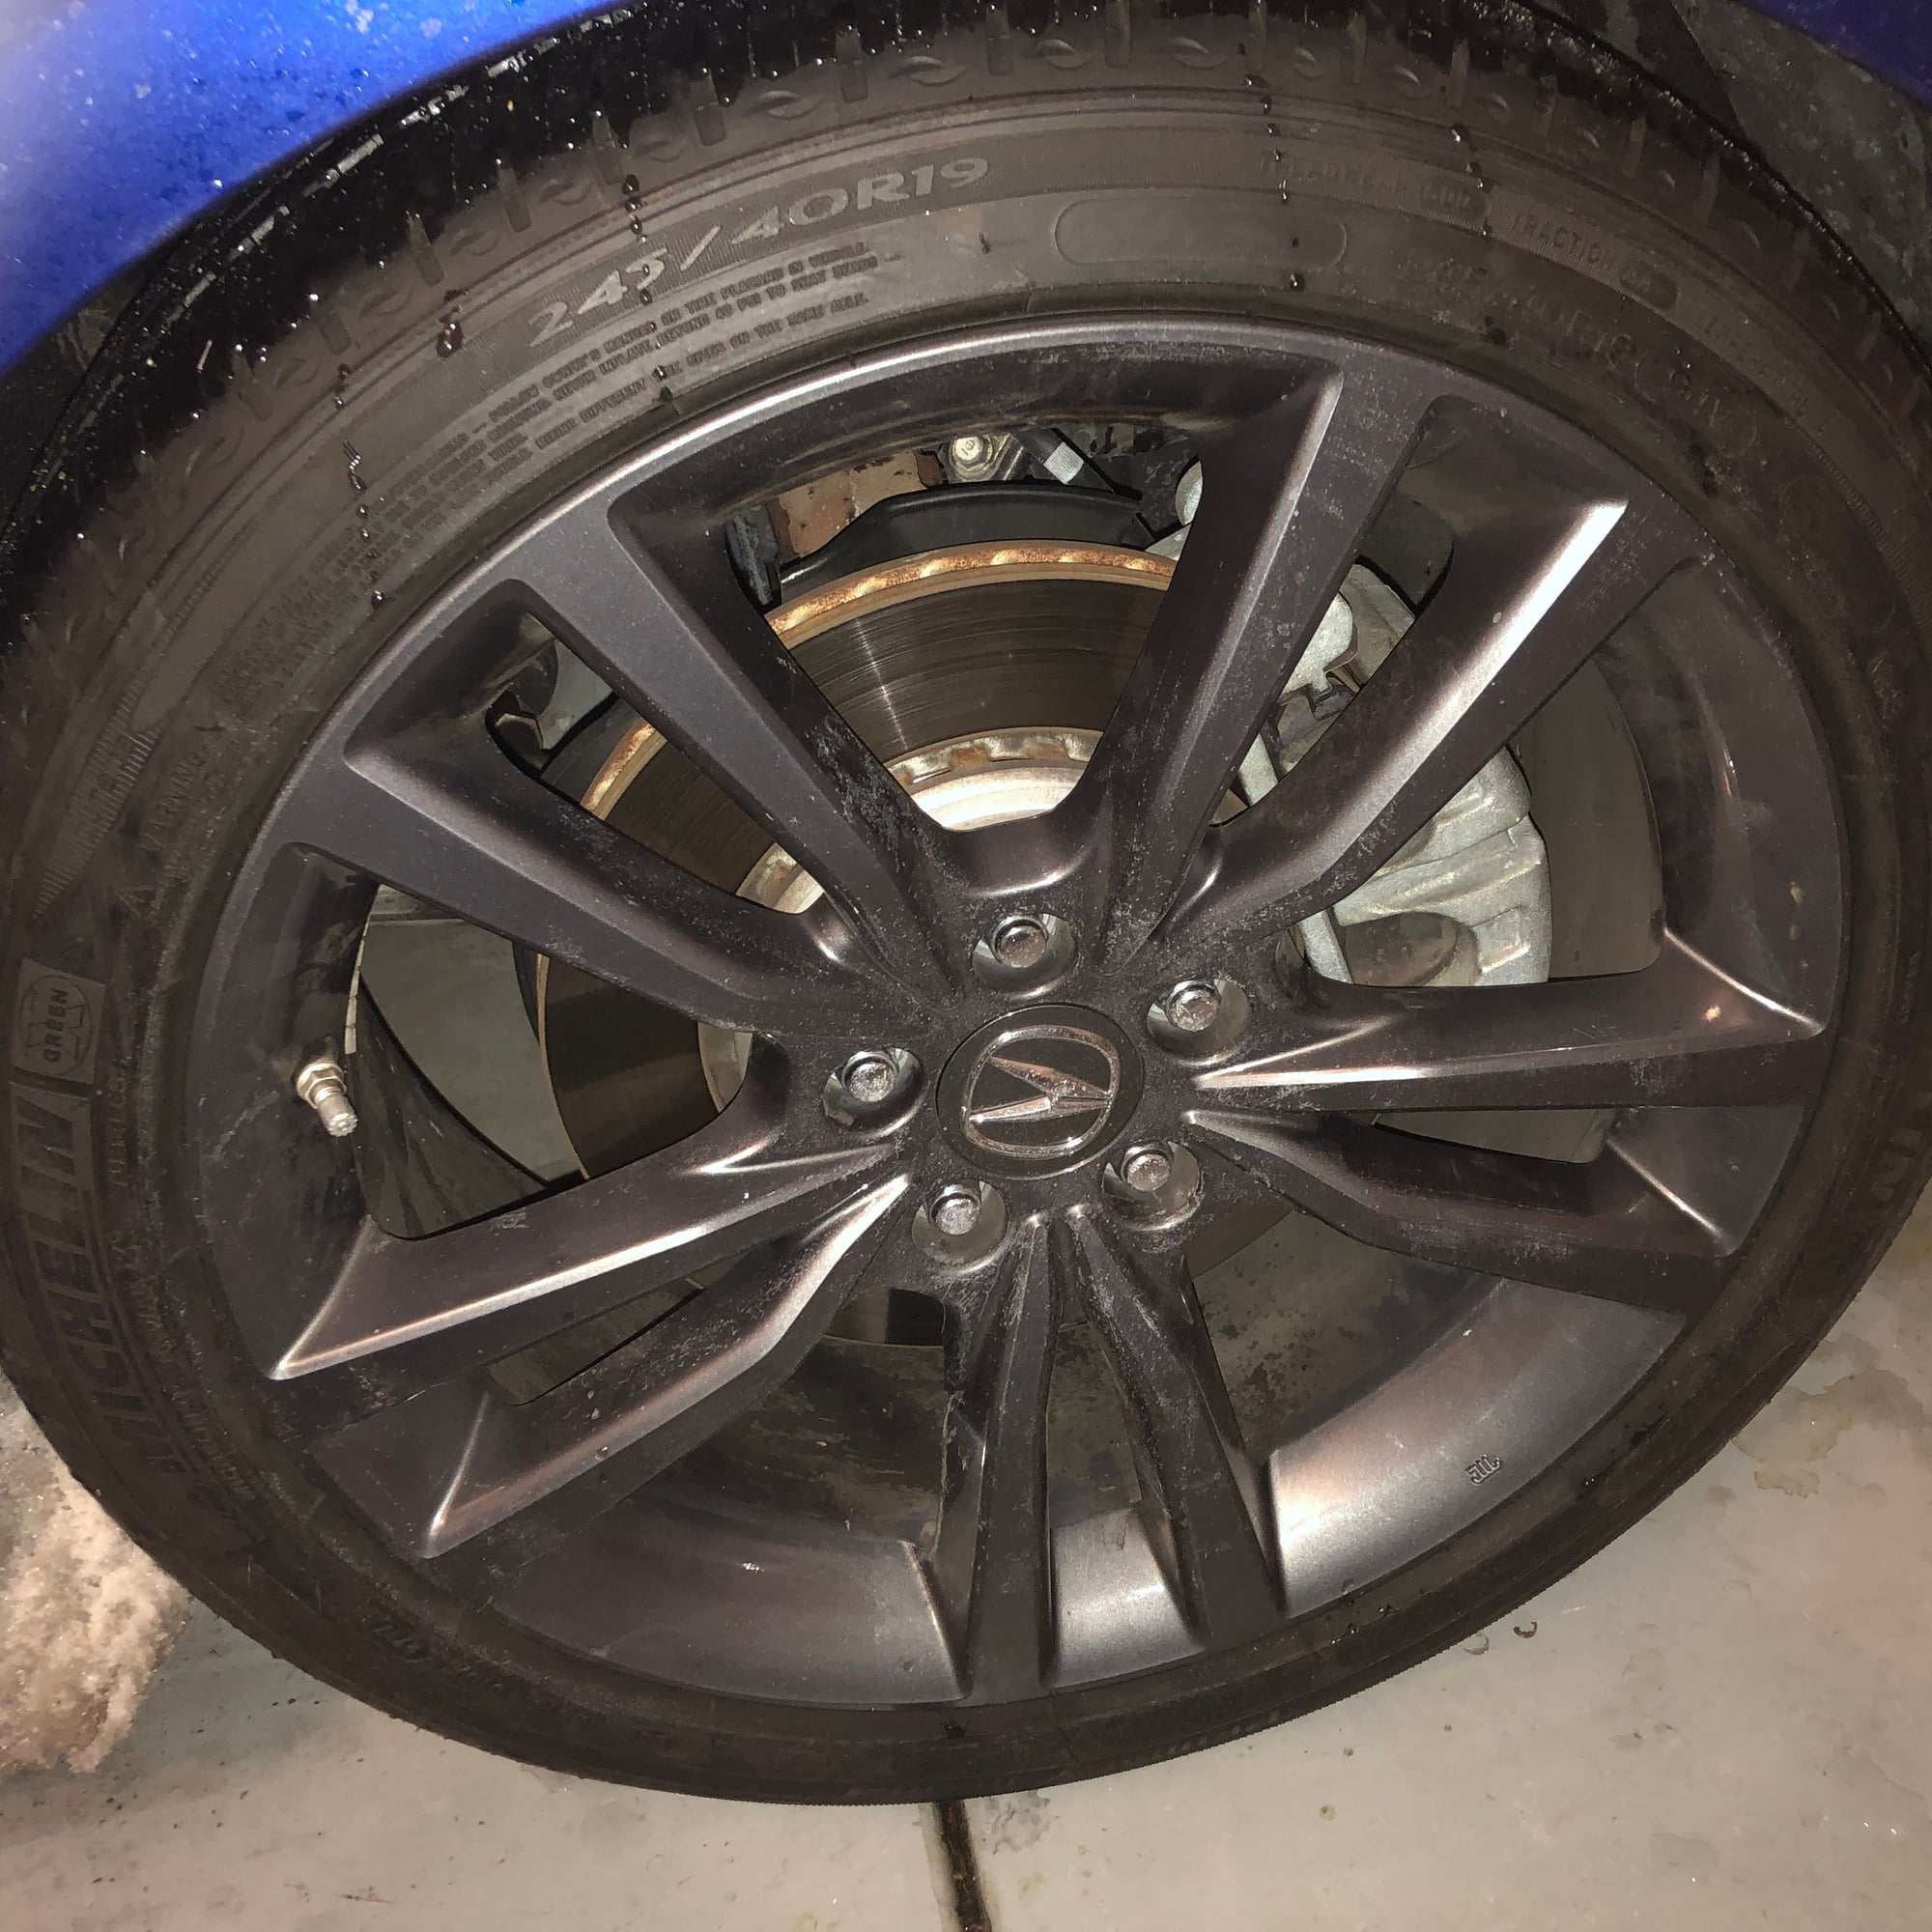 Wheels and Tires/Axles - SOLD: 2018 Tlx Aspec wheels and tires - Used - 2015 to 2019 Acura TLX - St Charles, IL 60175, United States